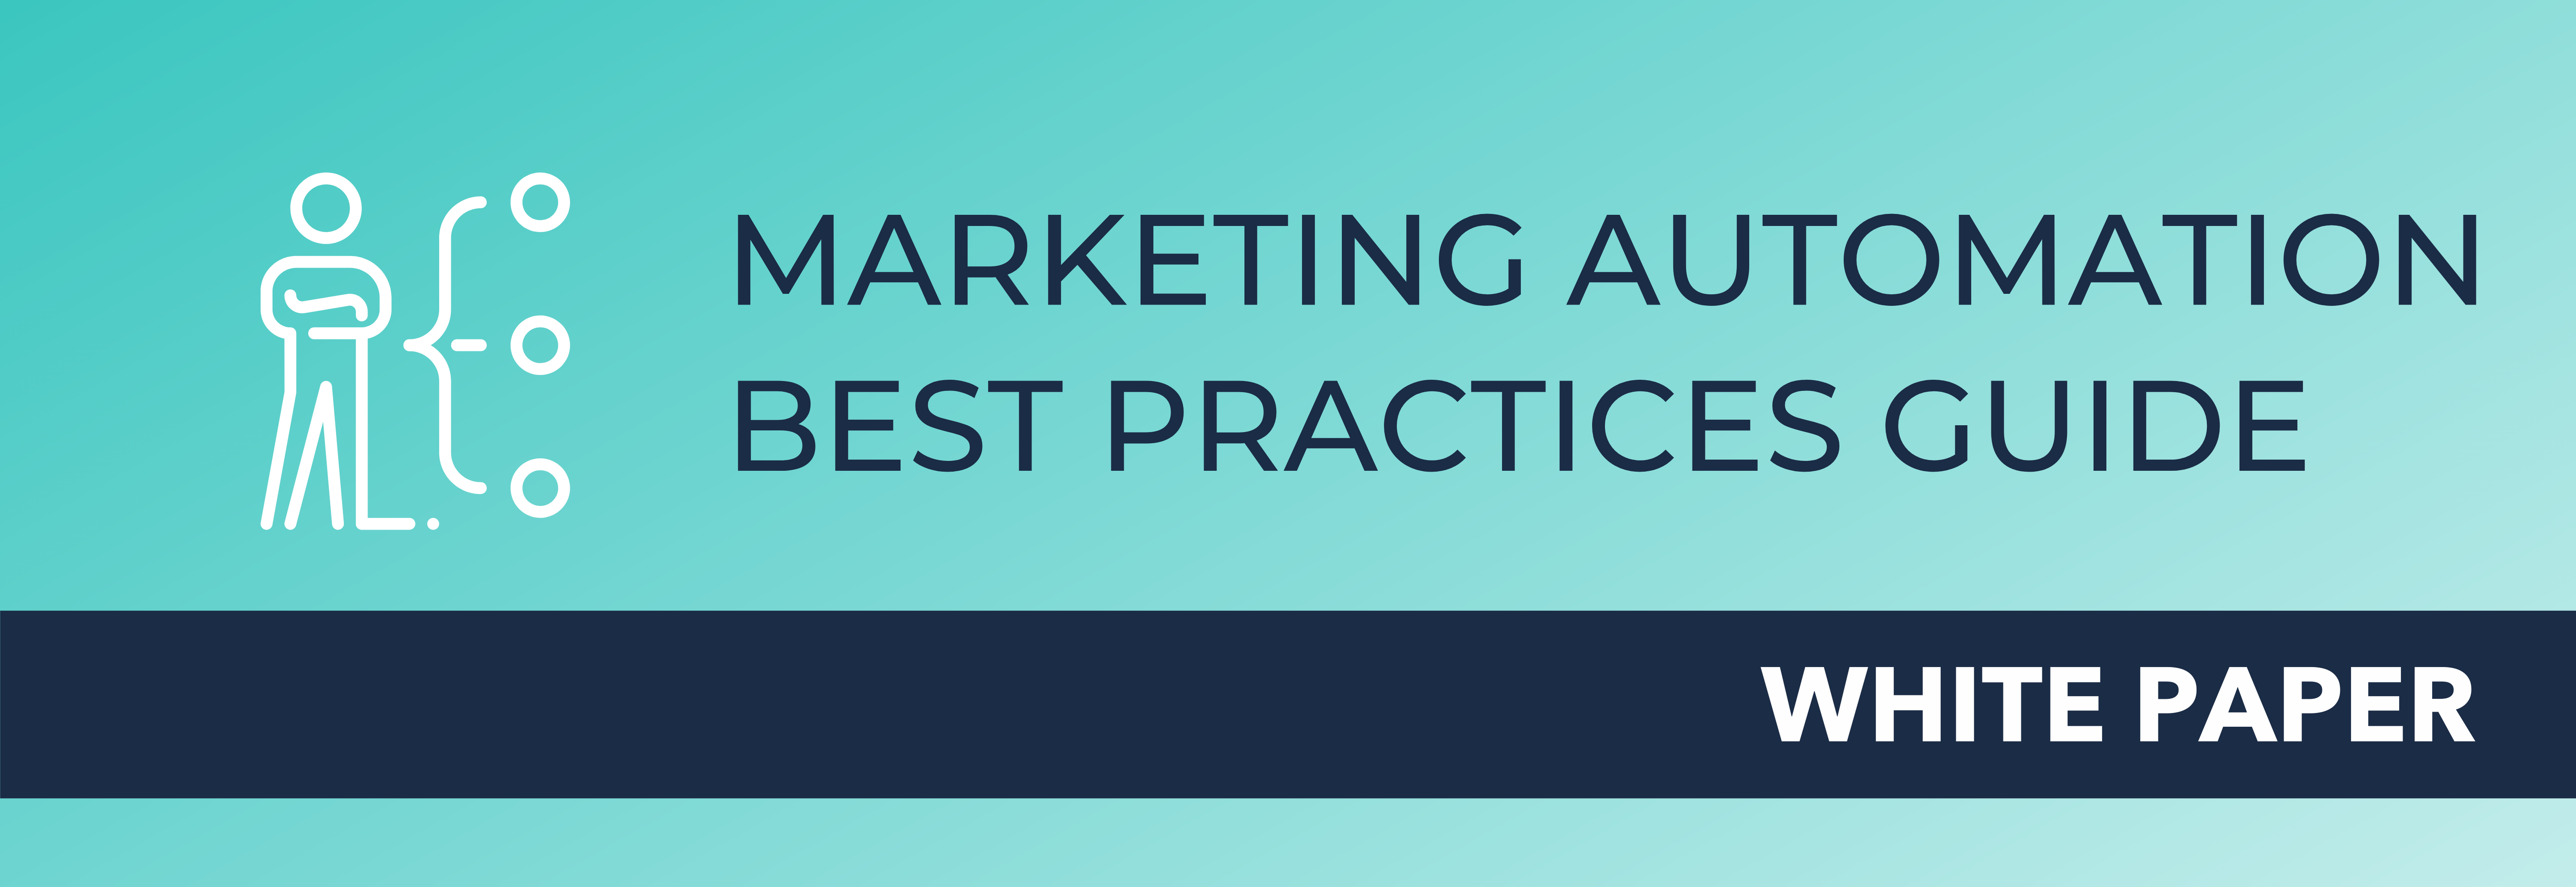 Marketing Automation Best Practices Guide